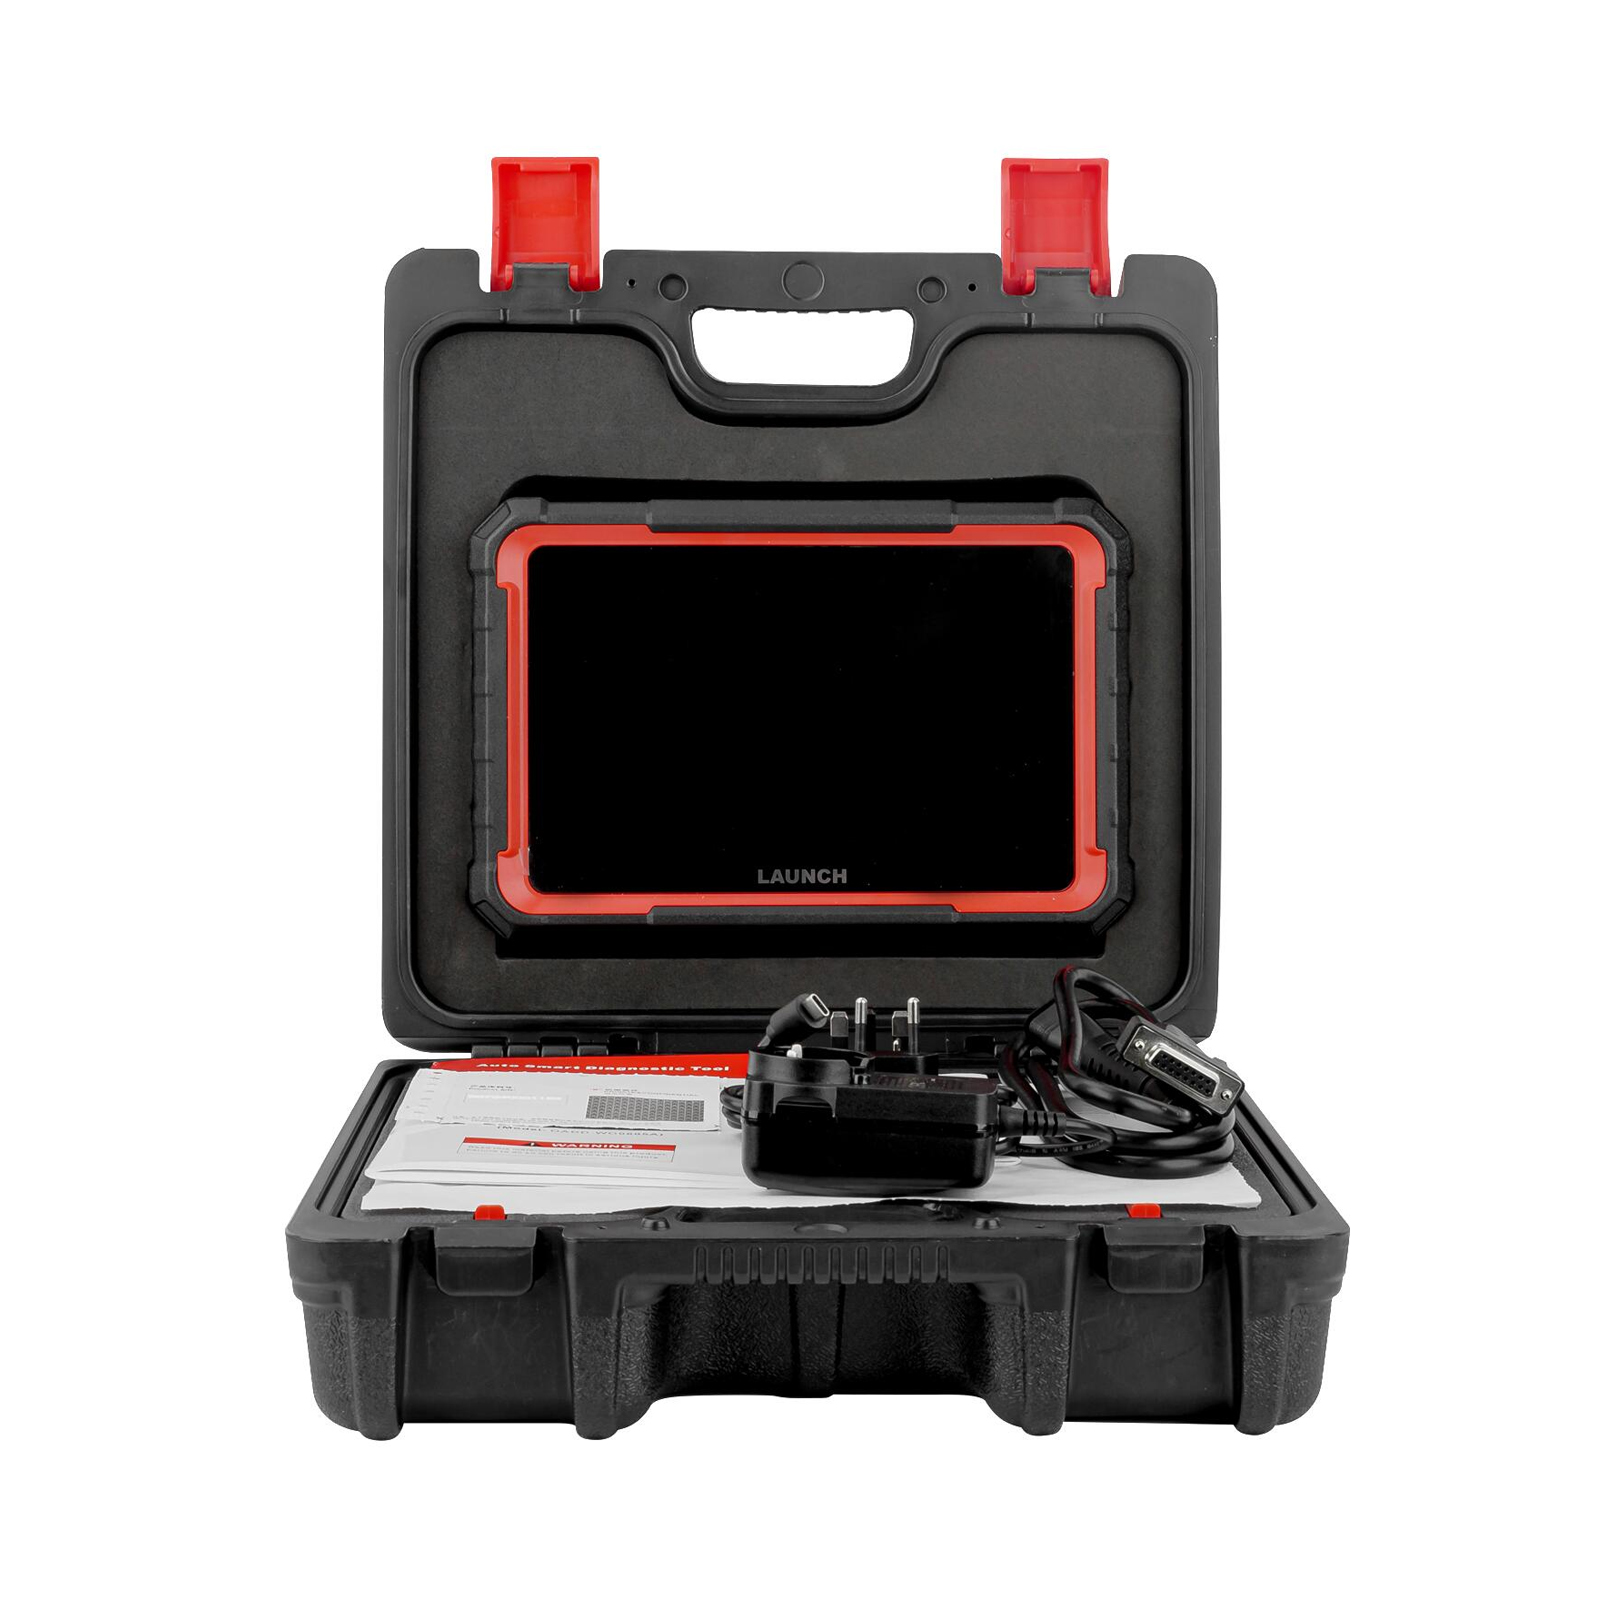 LAUNCH X431 PRO ELITE 8'inch GL Version Diagnostic Tool Supports CAN FD DoIP